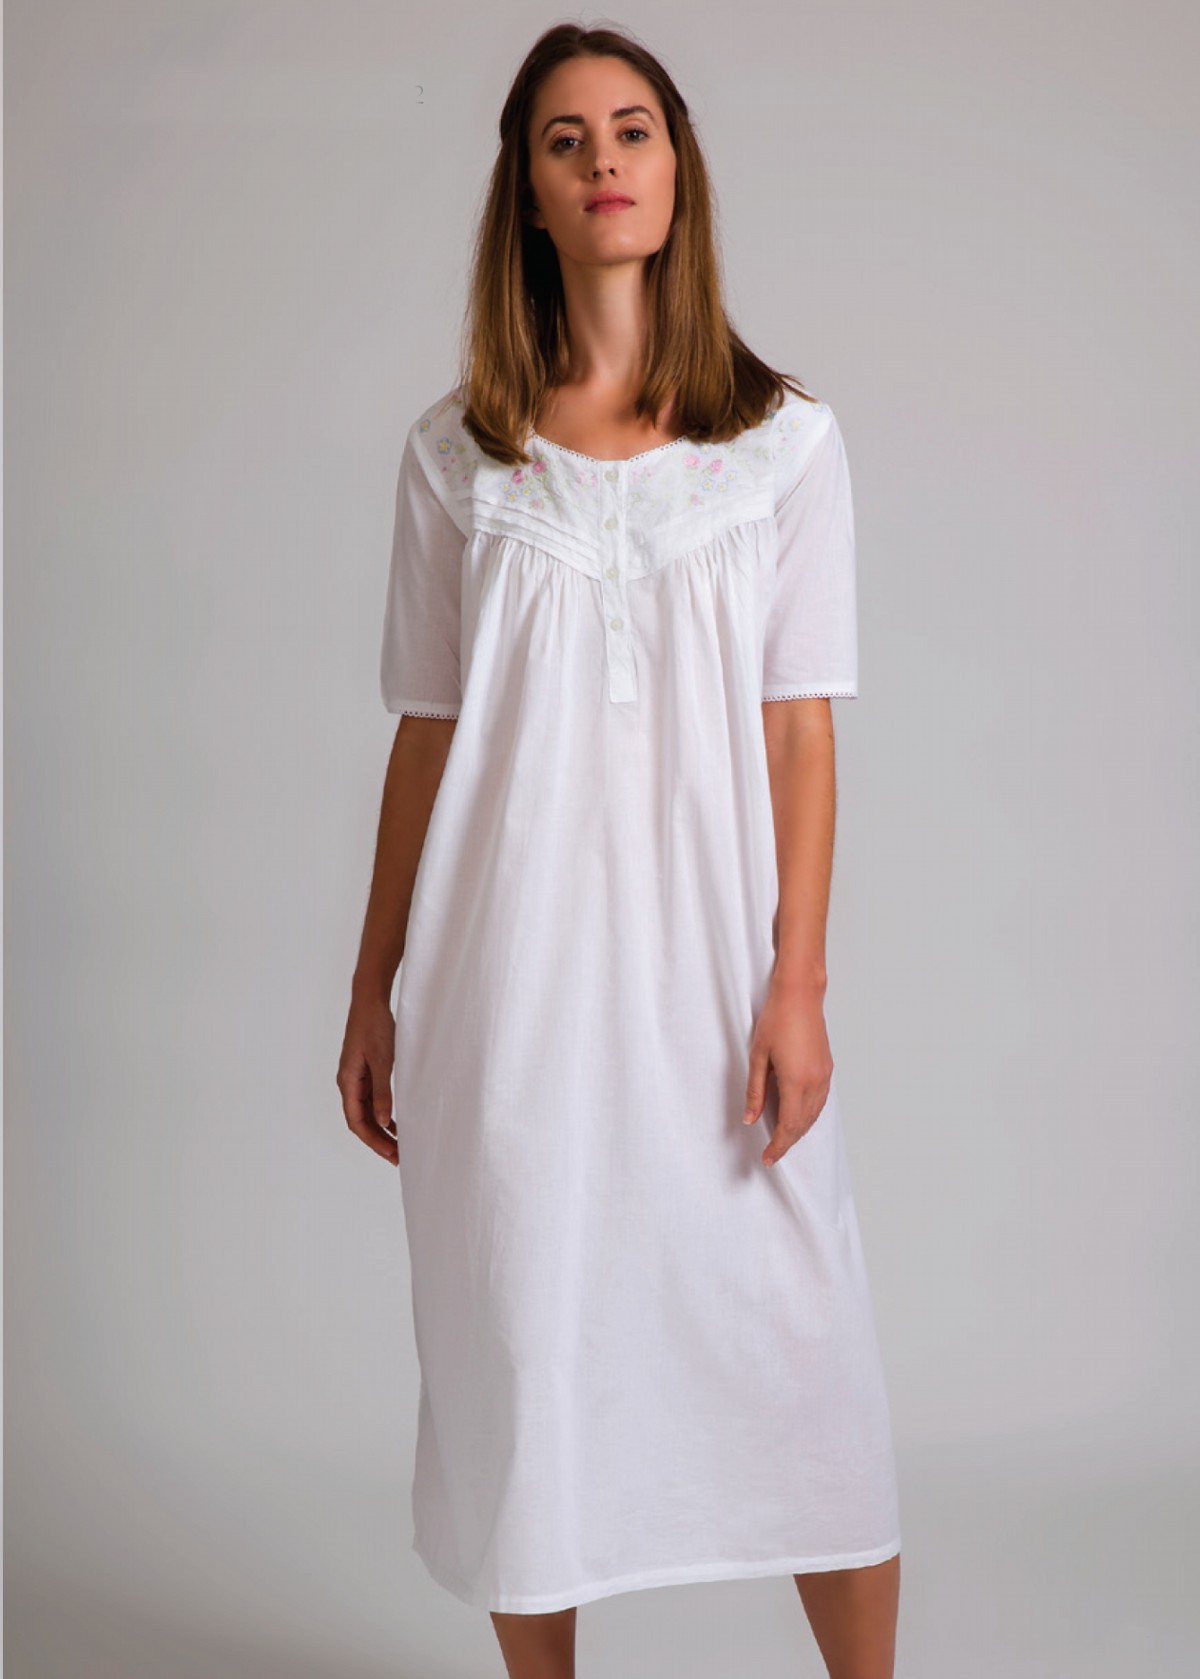 Arabella Cotton Nightie with Embroidery - Short Sleeve